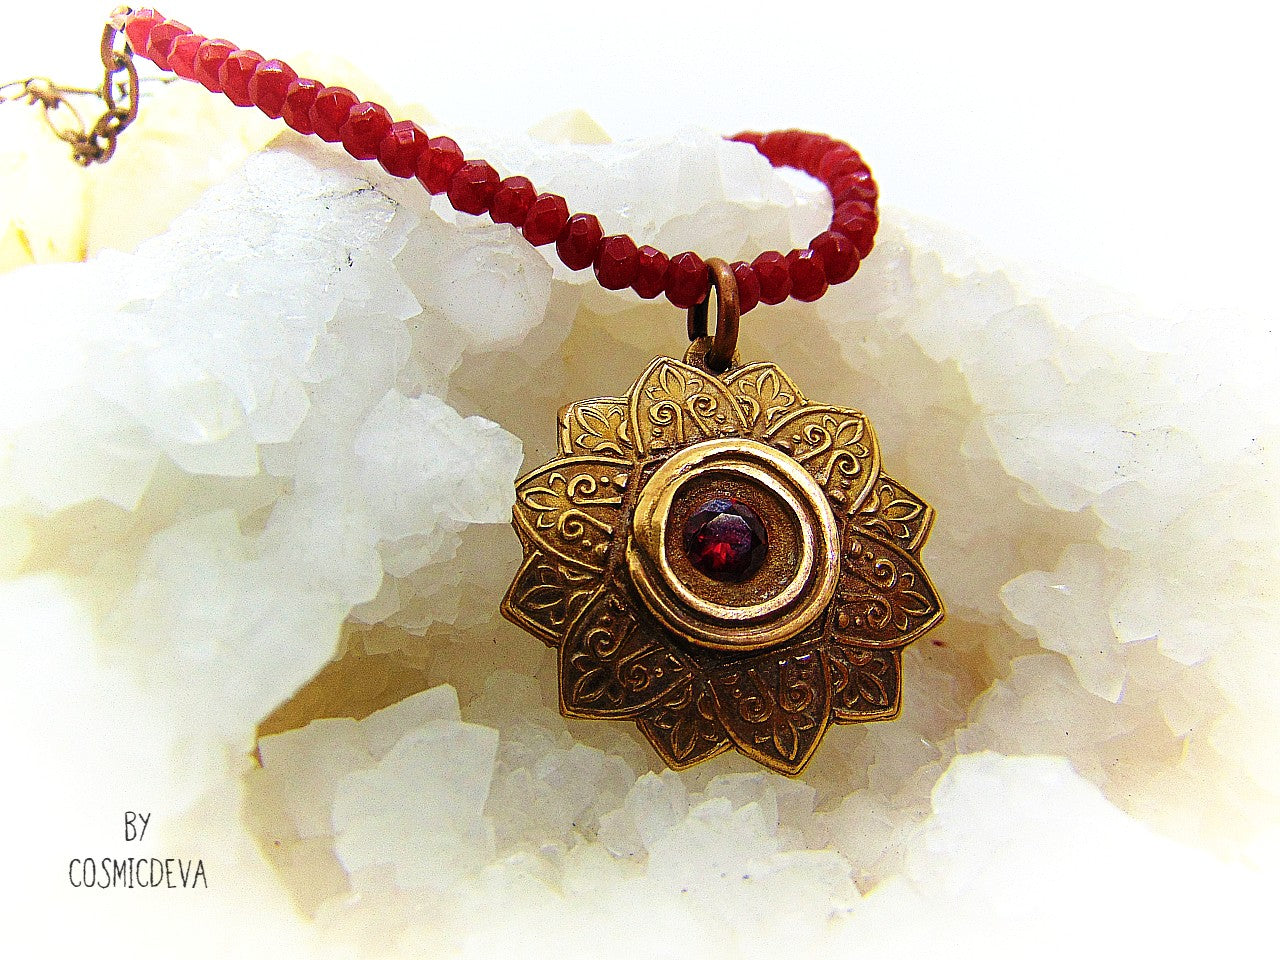 Celebrate your spiritual side with this unique Red Ruby Mandala Mendhi Gold Bronze Necklace. Crafted with a hand-formed bronze pendant, a stunning faceted lab-created ruby gemstone, and adorned with small red jade rondelle beads, this one of a kind necklace is an inspired homage to Indian Mehndi culture. Fall in love with the beauty and mystery of this spiritual accessory!